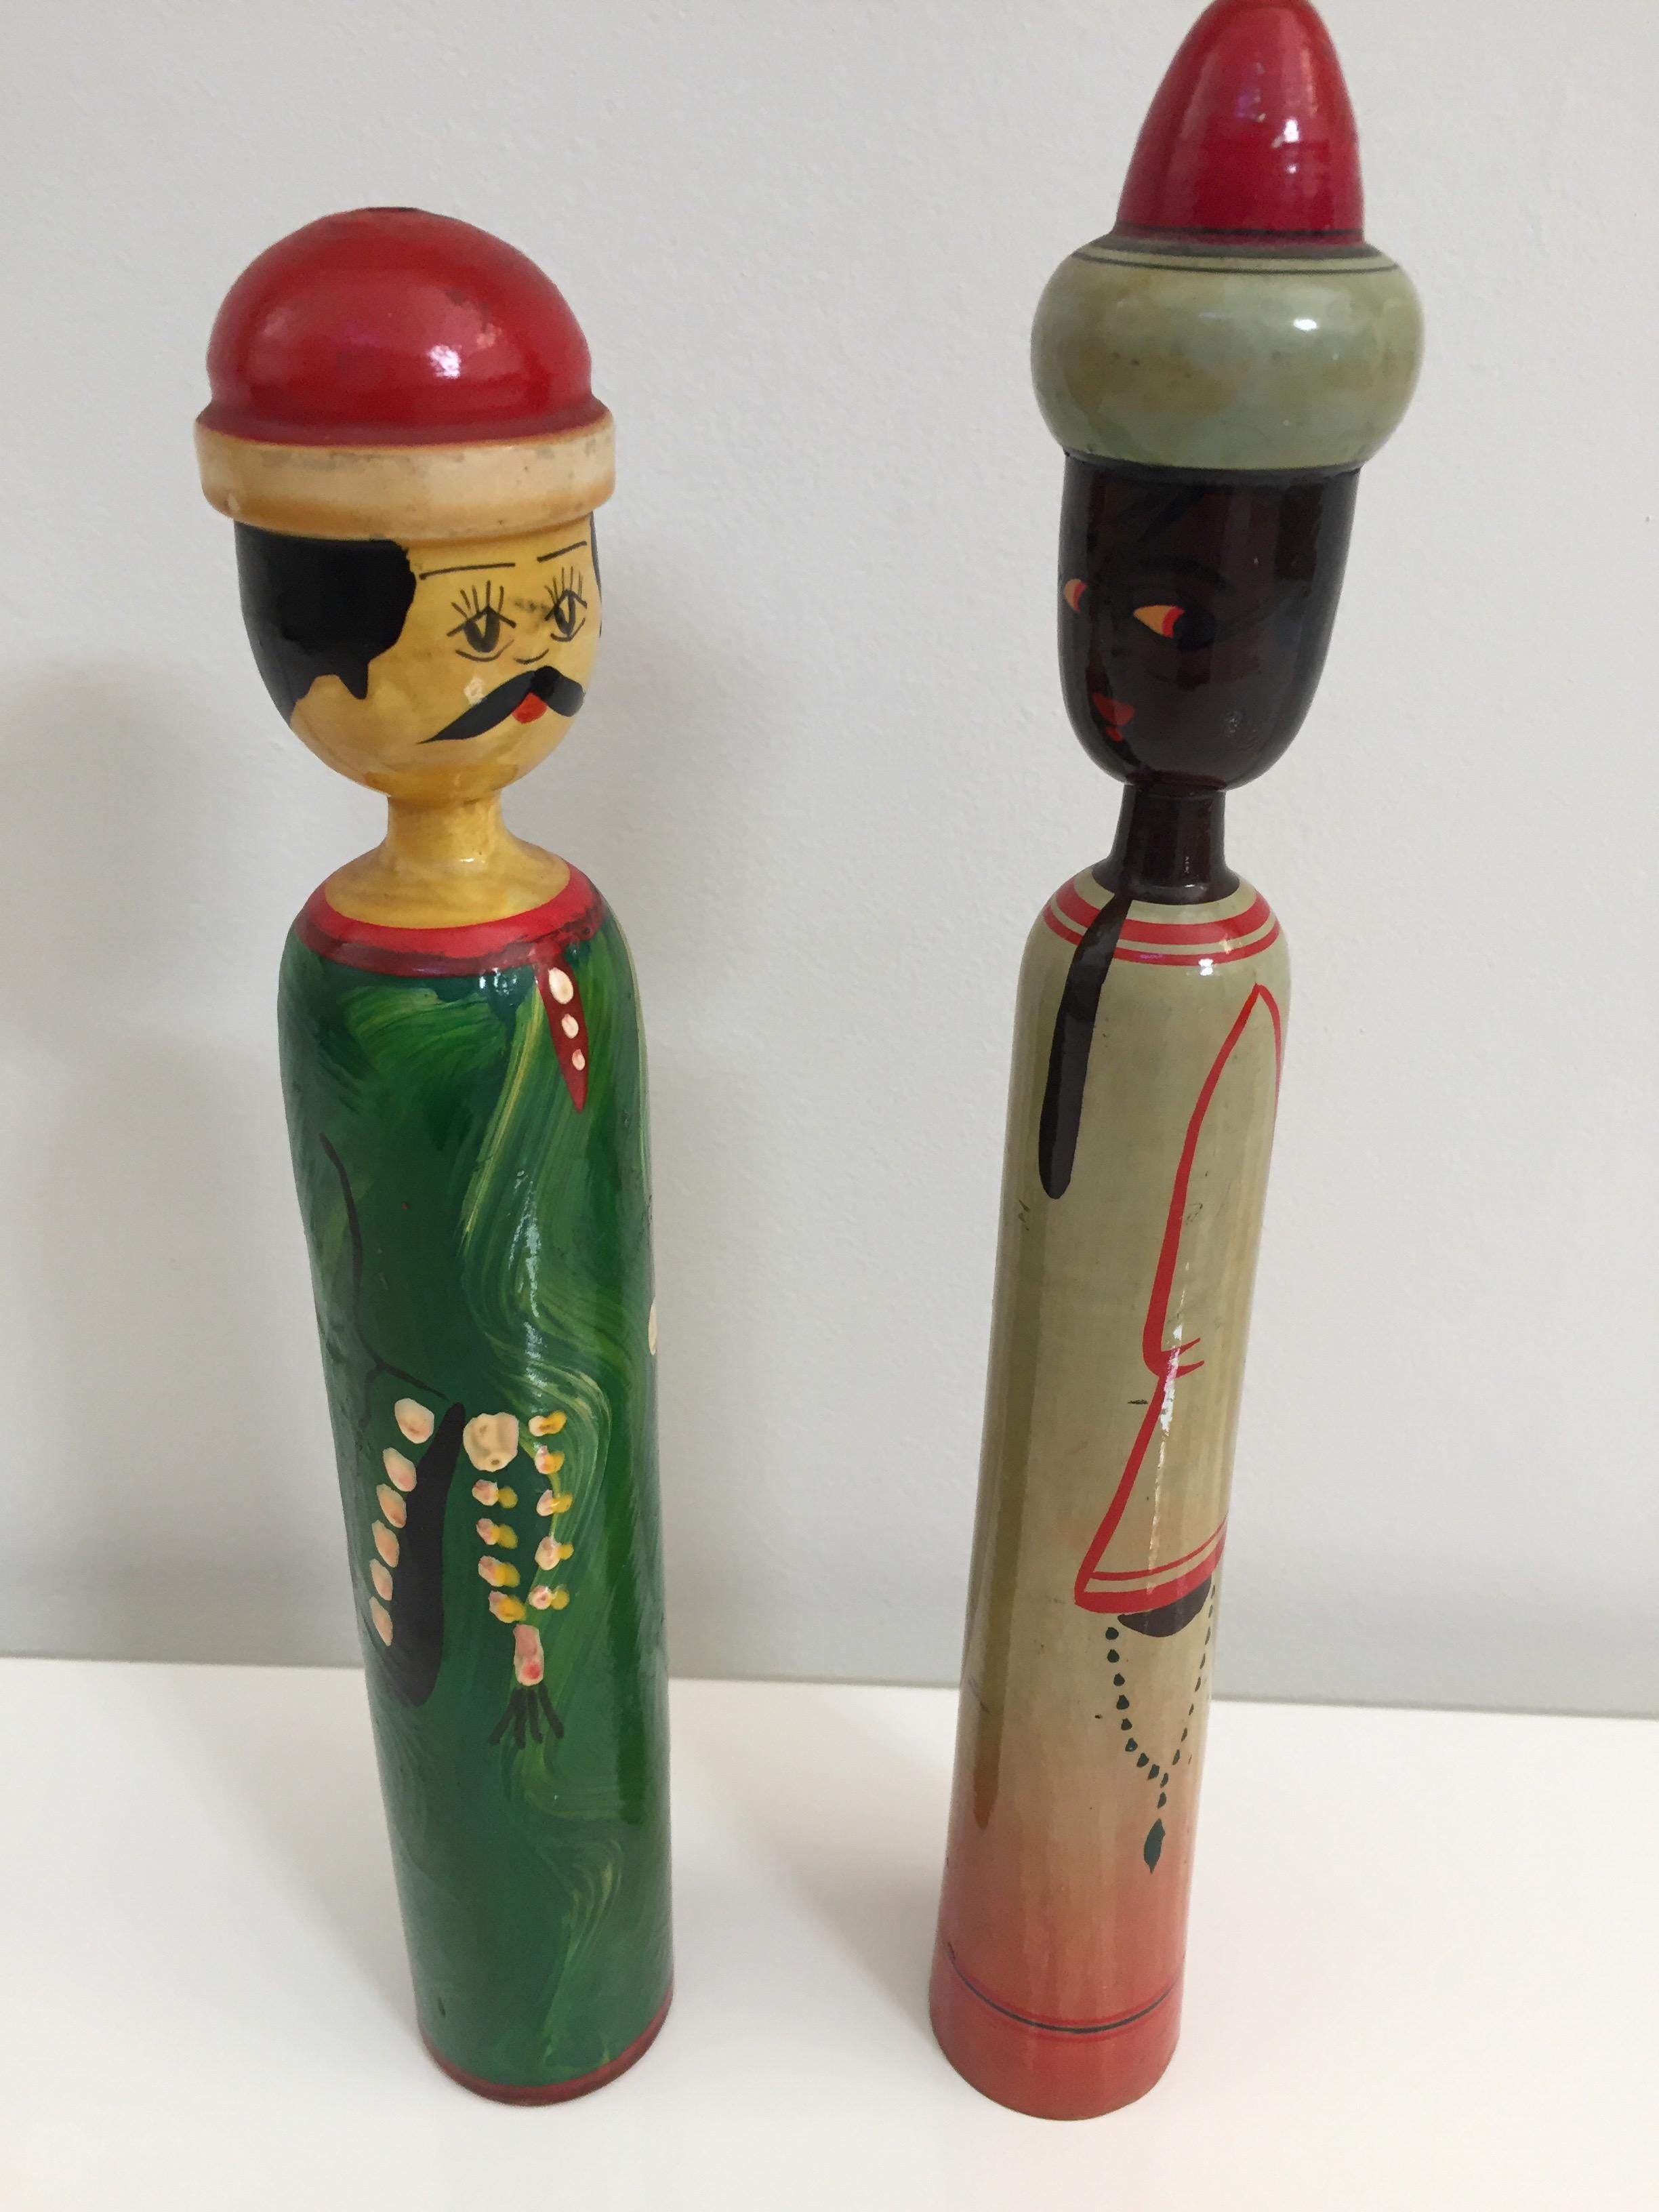 Wooden Artisanal middle eastern men dolls.
Set of two handcrafted and hand painted dolls, collectible toys of middle eastern Folk Art, men wearing traditional costumes and red hat.